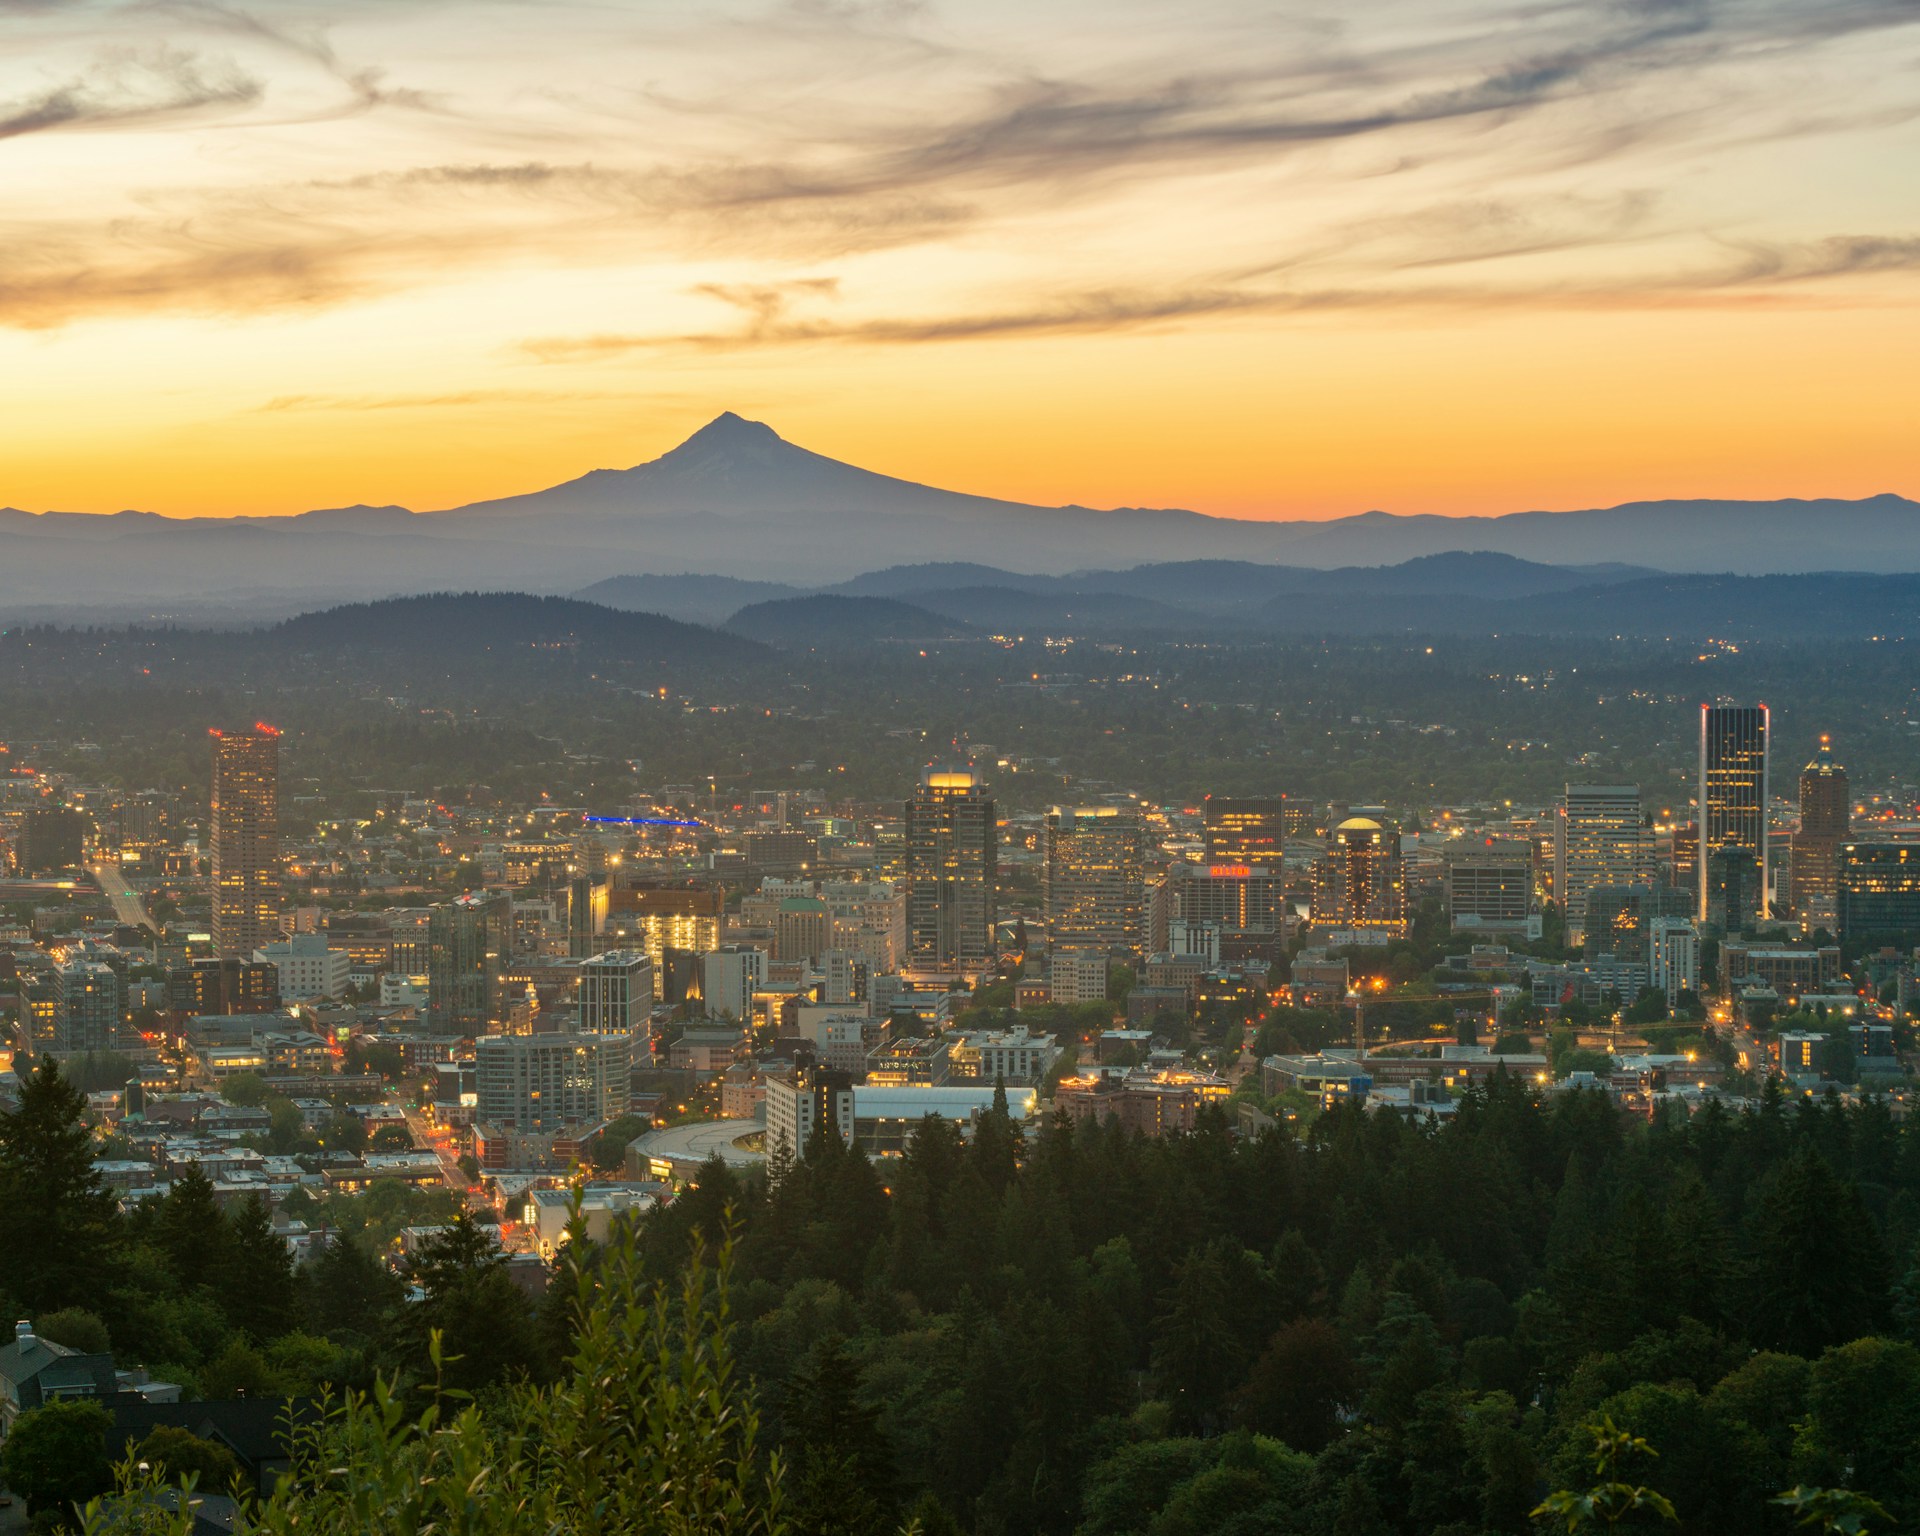 Portland skyline with Mt. Hood in the background